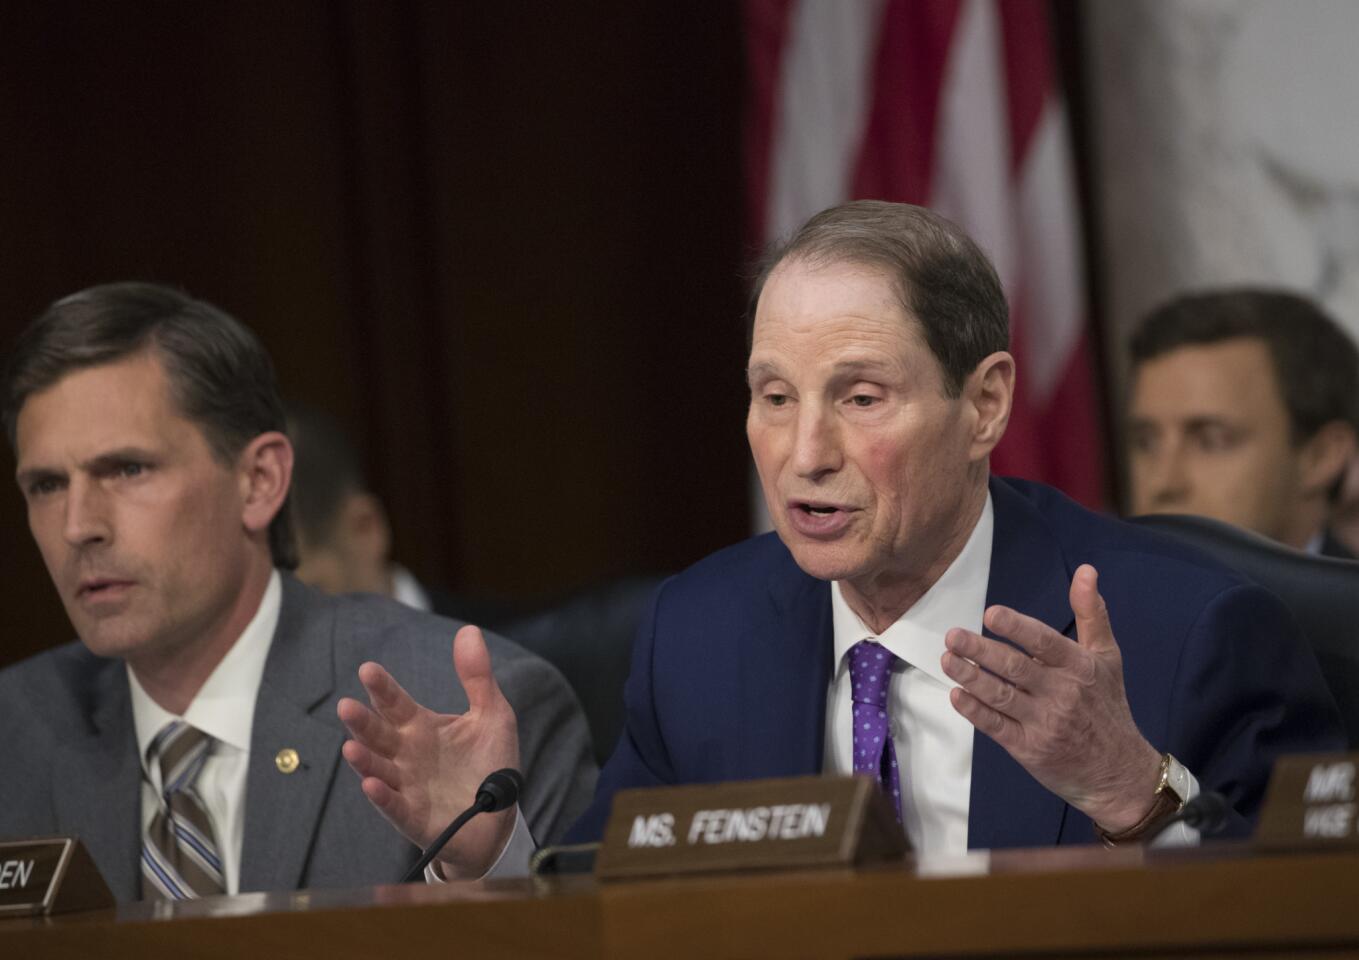 Senate Intelligence Committee member Sen. Ron Wyden, D-Ore., right, with Sen. Martin Heinrich, D-N.M., questions Attorney General Jeff Sessions on Capitol Hill in Washington, Tuesday, June 13, 2017, during the committee's hearing about his role in the firing of FBI Director James Comey and the investigation into contacts between Trump campaign associates and Russia. (AP Photo/J. Scott Applewhite)